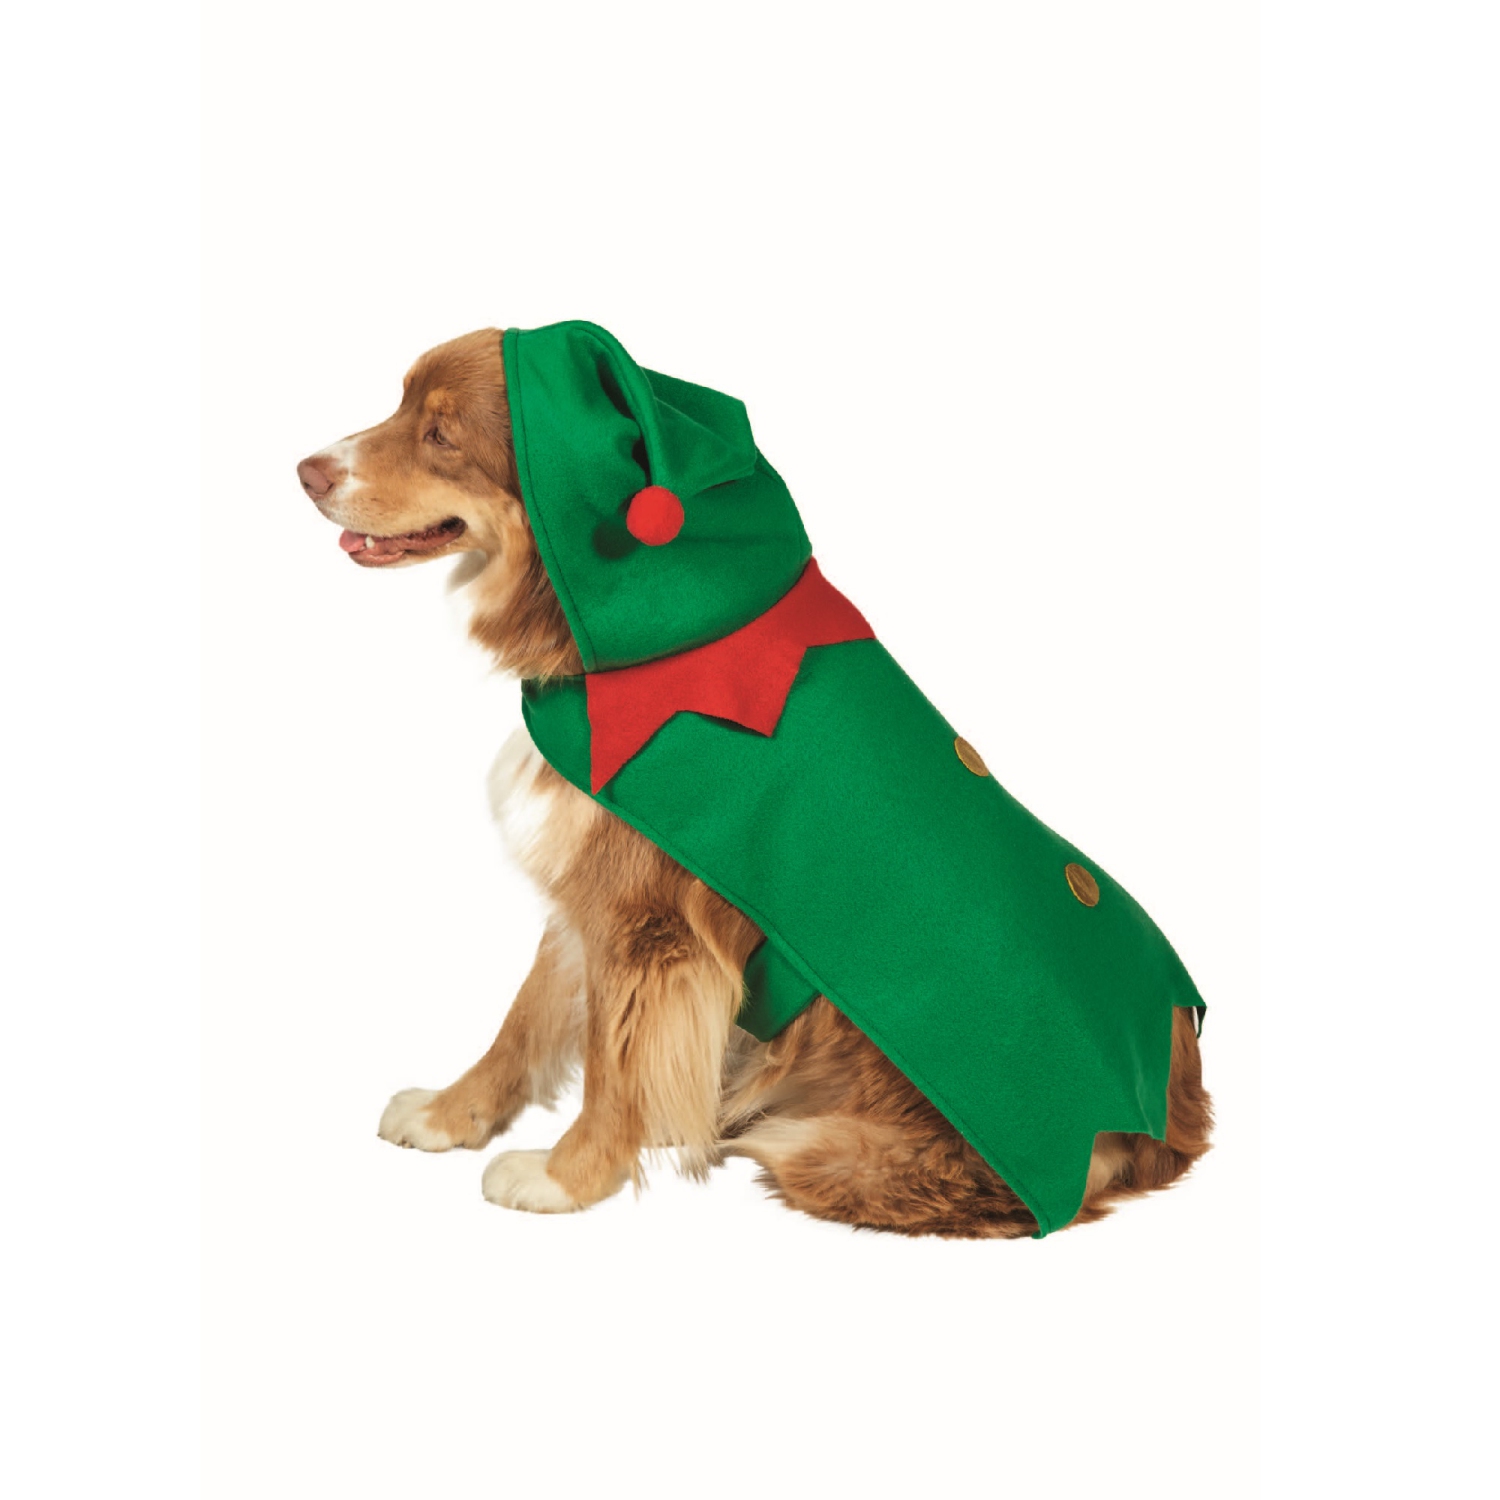 27" Green and Red Christmas Elf Dog Costume - Size Extra Small